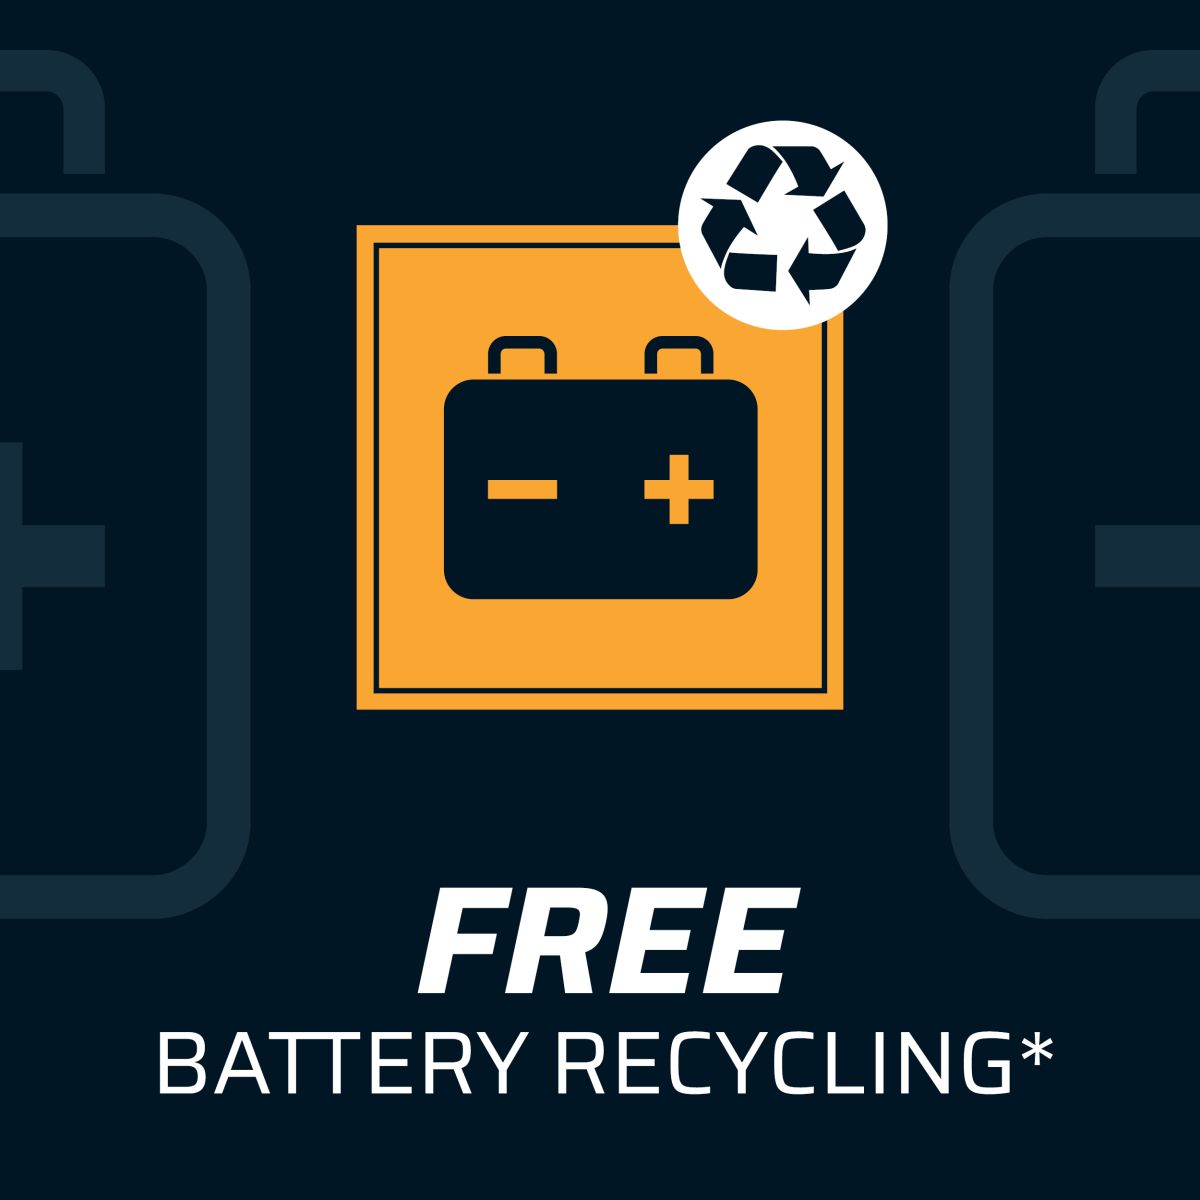 Free Battery Recycling*